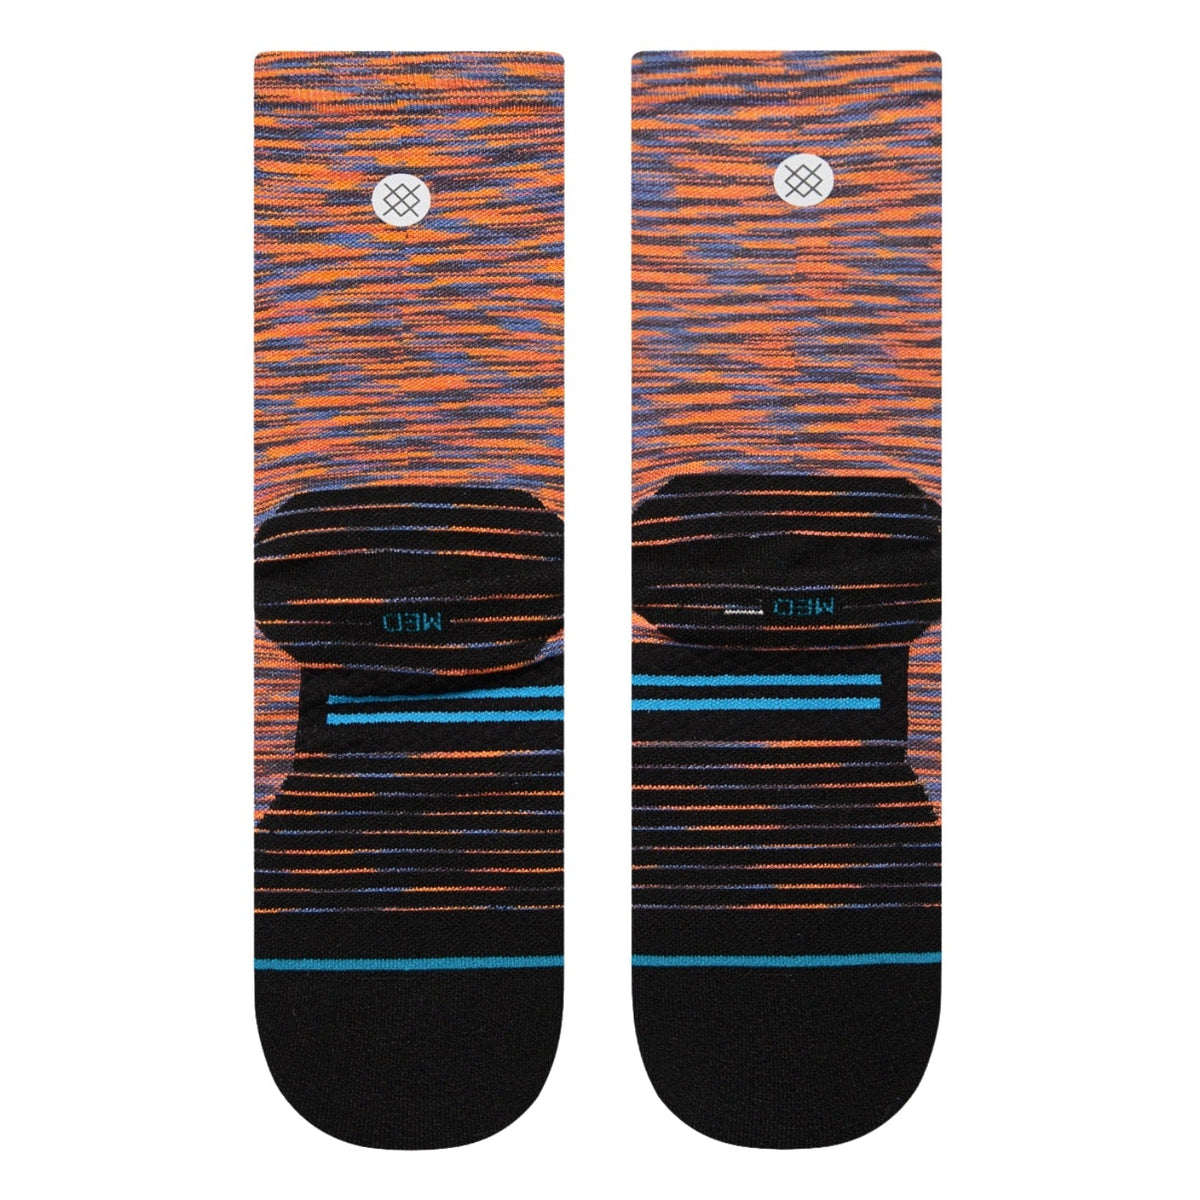 Stance Cautionary Crew Sock - Space Dust - Unisex Crew Length Socks by Stance